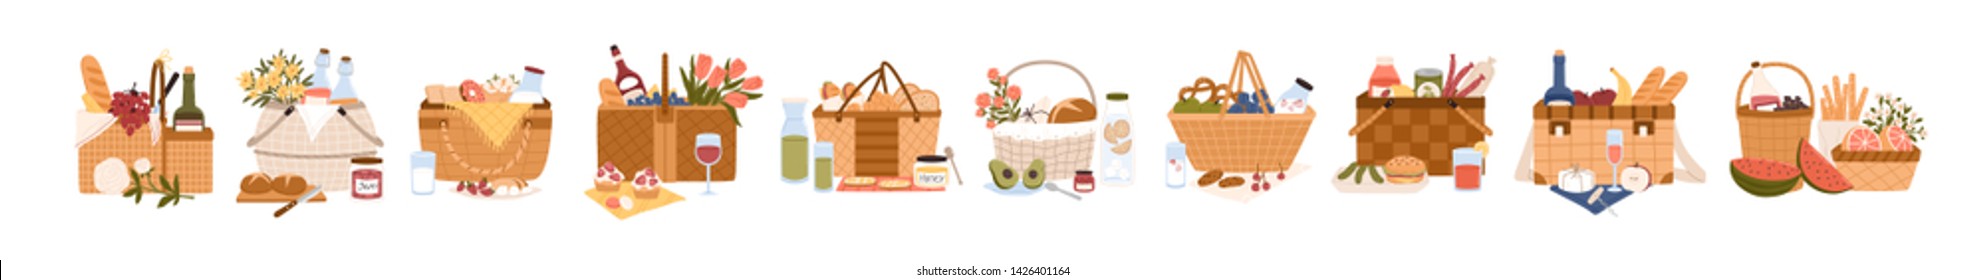 Collection of picnic baskets full of delicious meals and snacks for outdoor dining. Bundle of hampers for food storage isolated on white background. Colorful flat cartoon vector illustration.